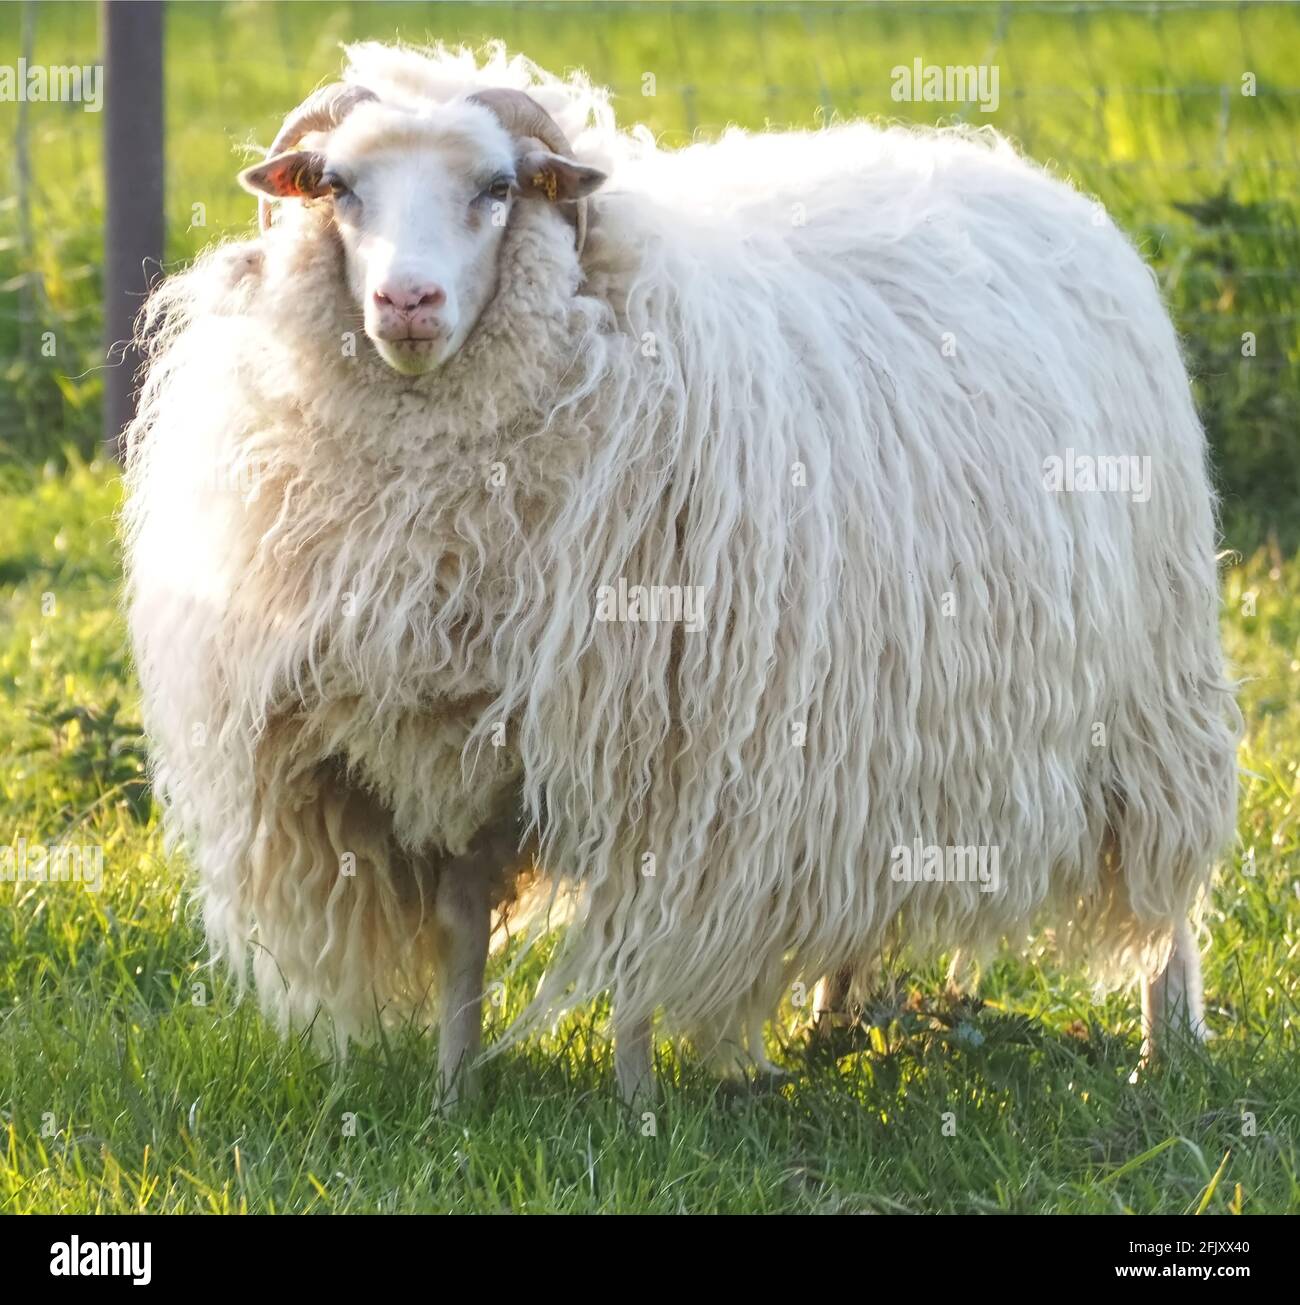 Isolated white aries sheep with horns and long wool Stock Photo - Alamy